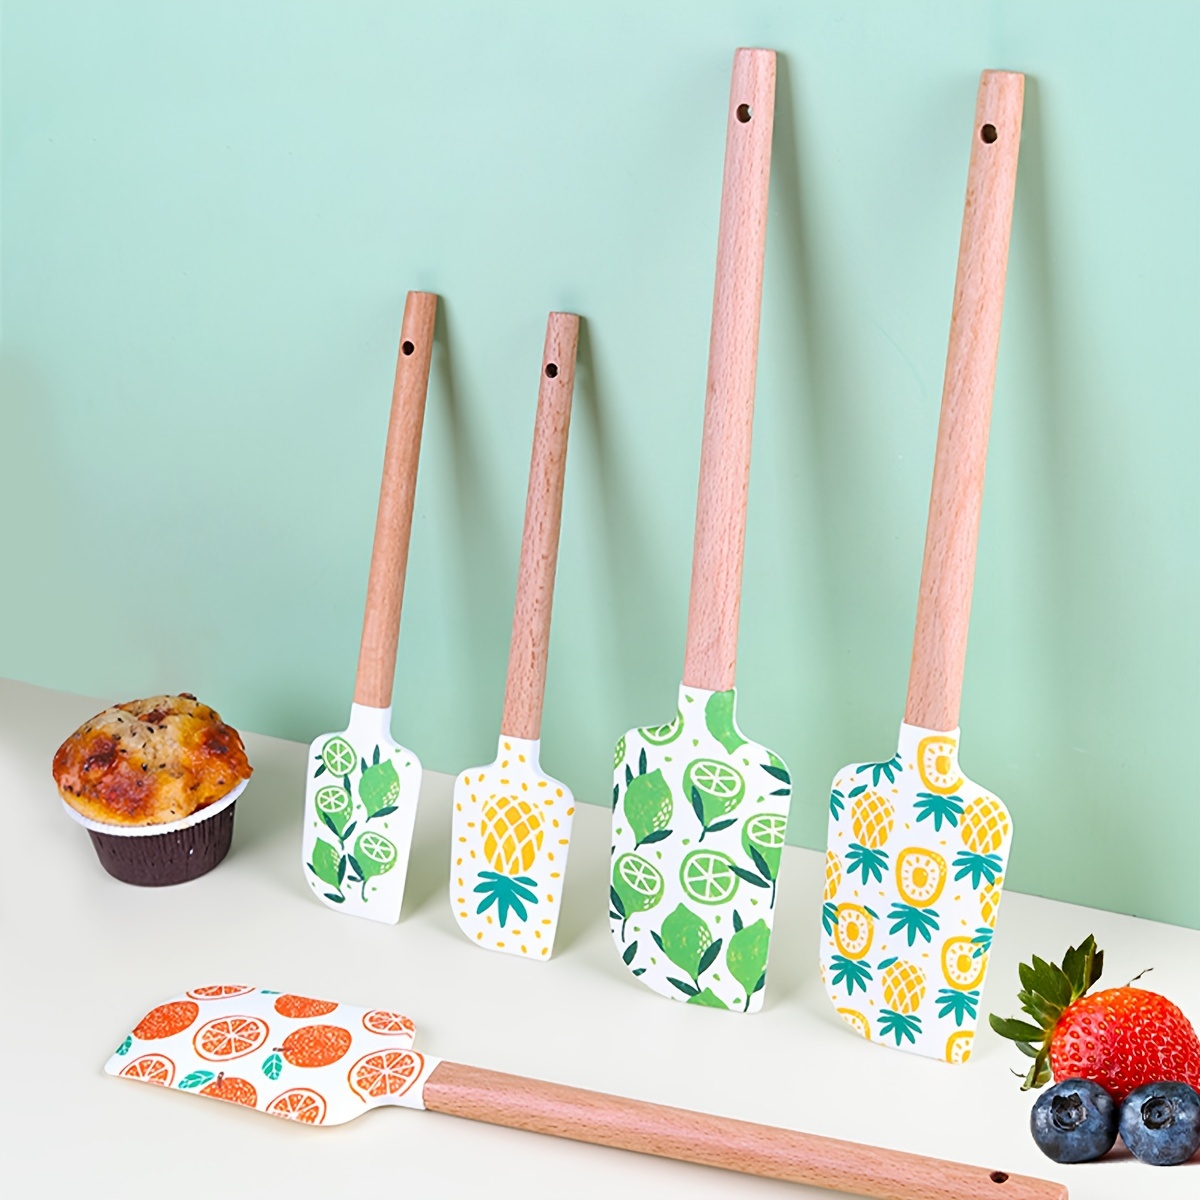 

Summer Fruit Pattern Silicone Spatula Set, Pineapple Orange Lime Designs, Food Grade Baking Tools, Kitchen Cake Bread Baking Accessories, 3 Sizes (s/m/l) - Kitchen And Dining Supplies